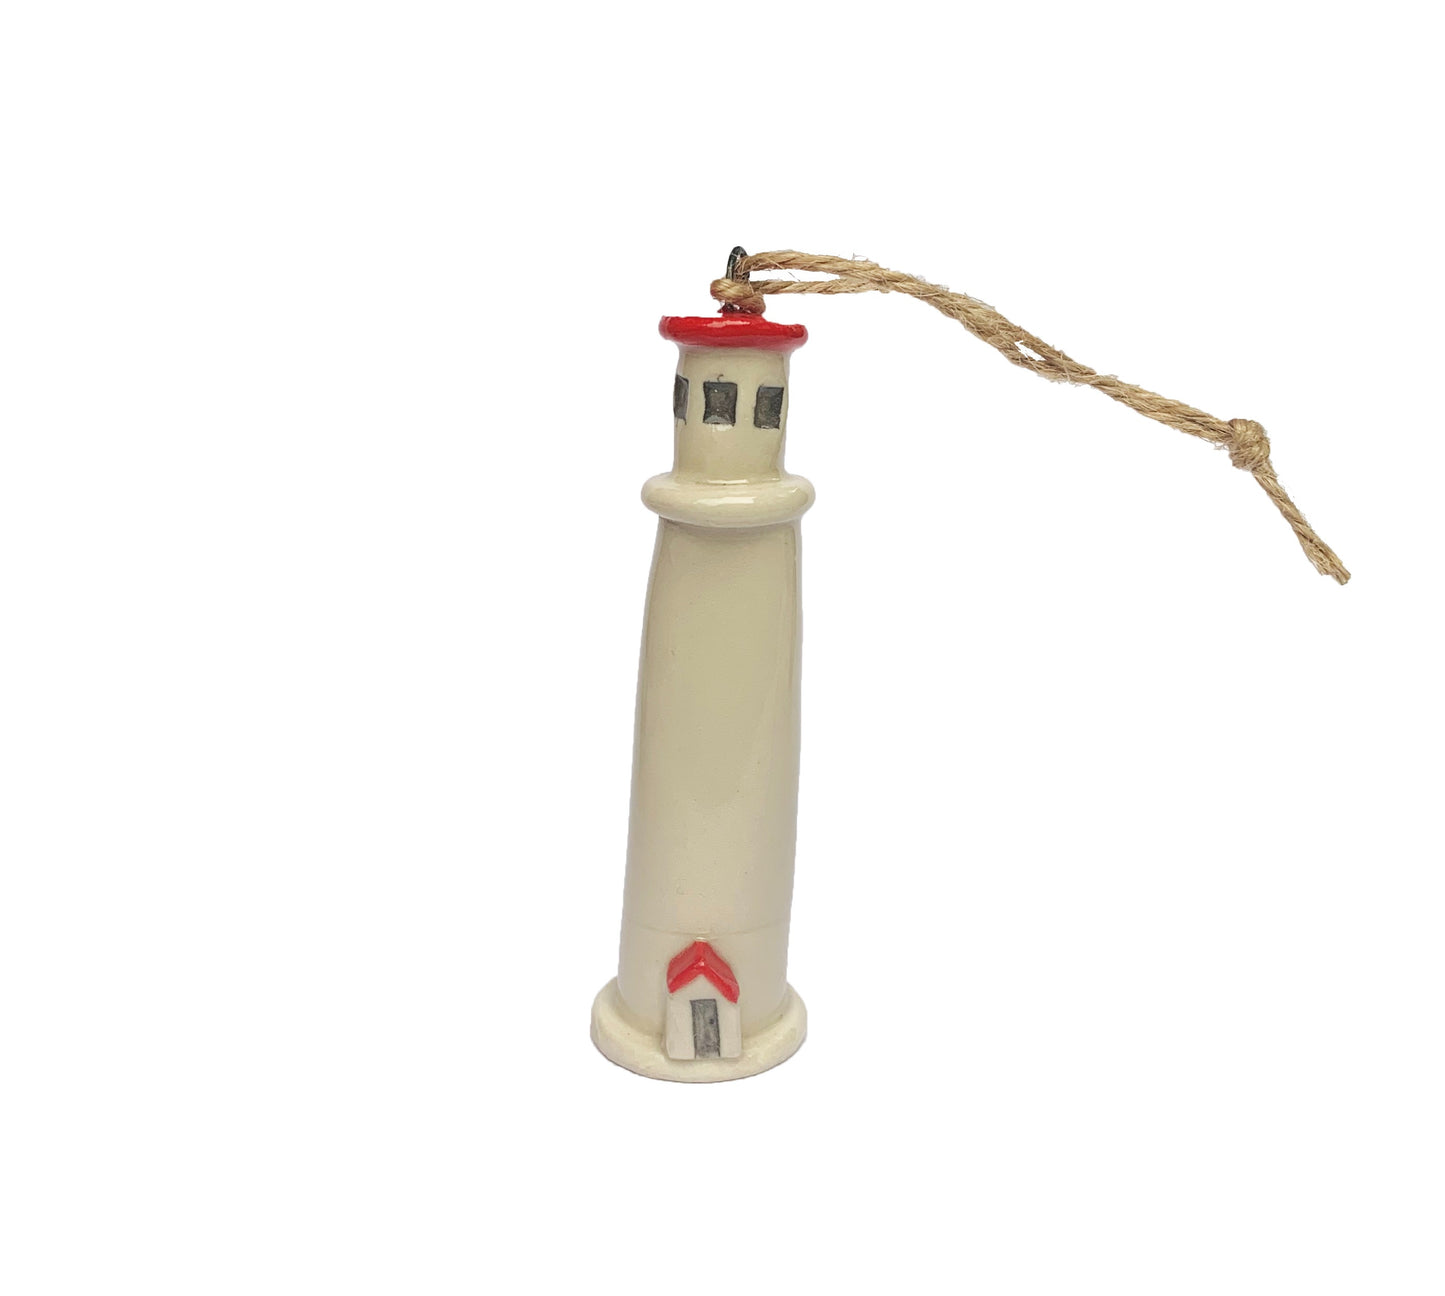 Hand painted ceramic red and white lighthouse ornament made in Nova Scotia, Canada.